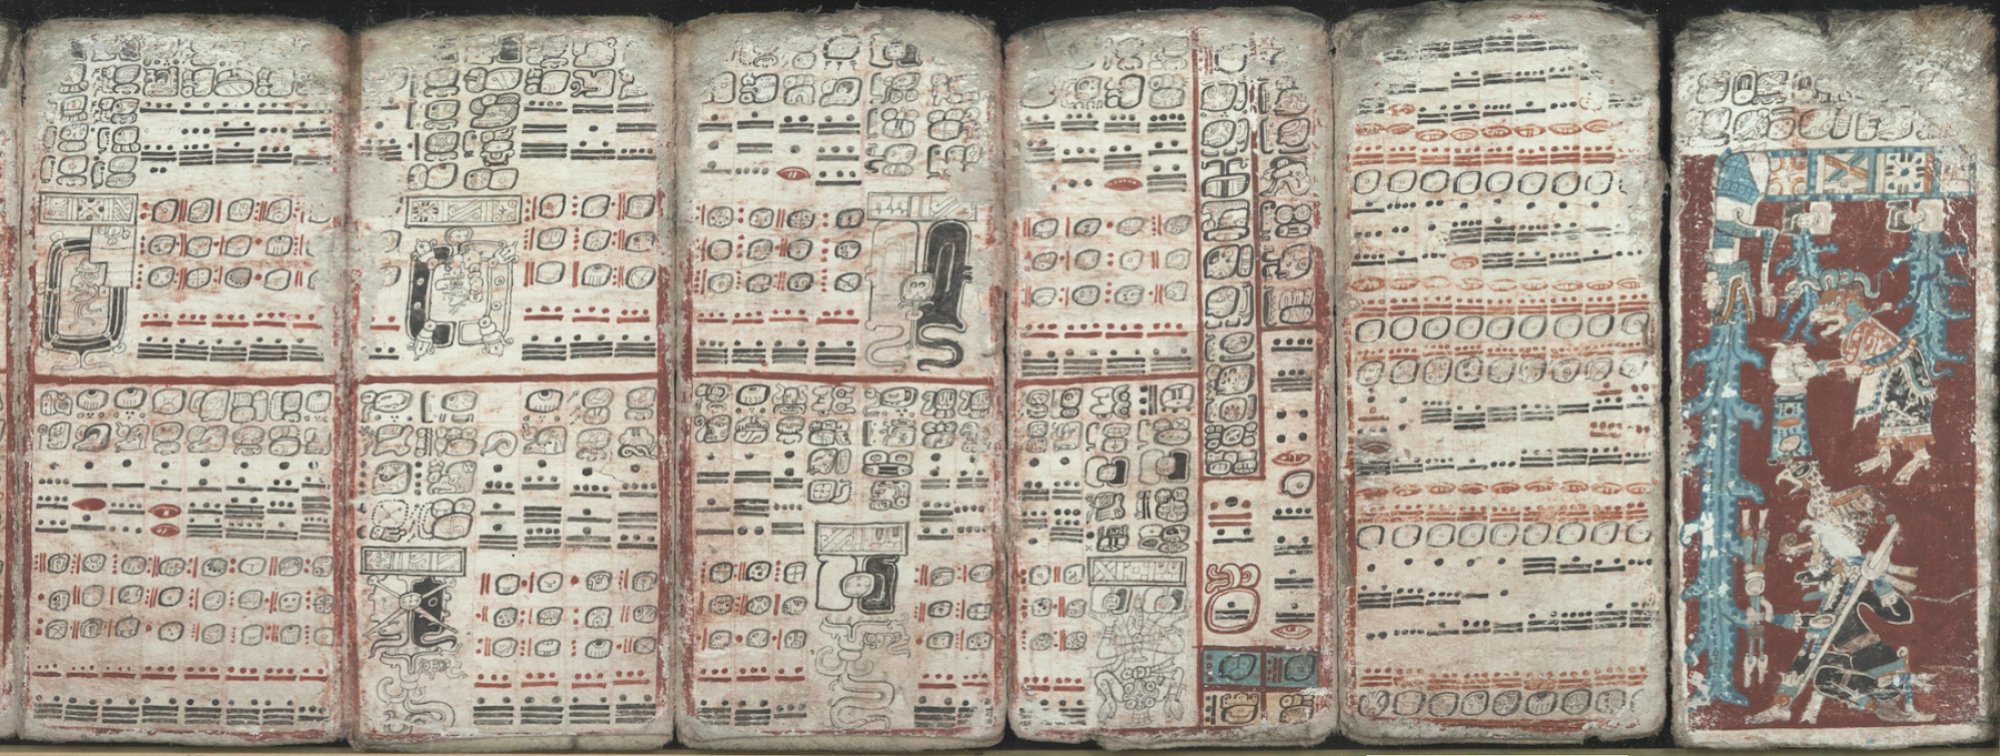 Six pages of the Mayan book called the Dresden Codex, which includes astronomical and eclipse information.